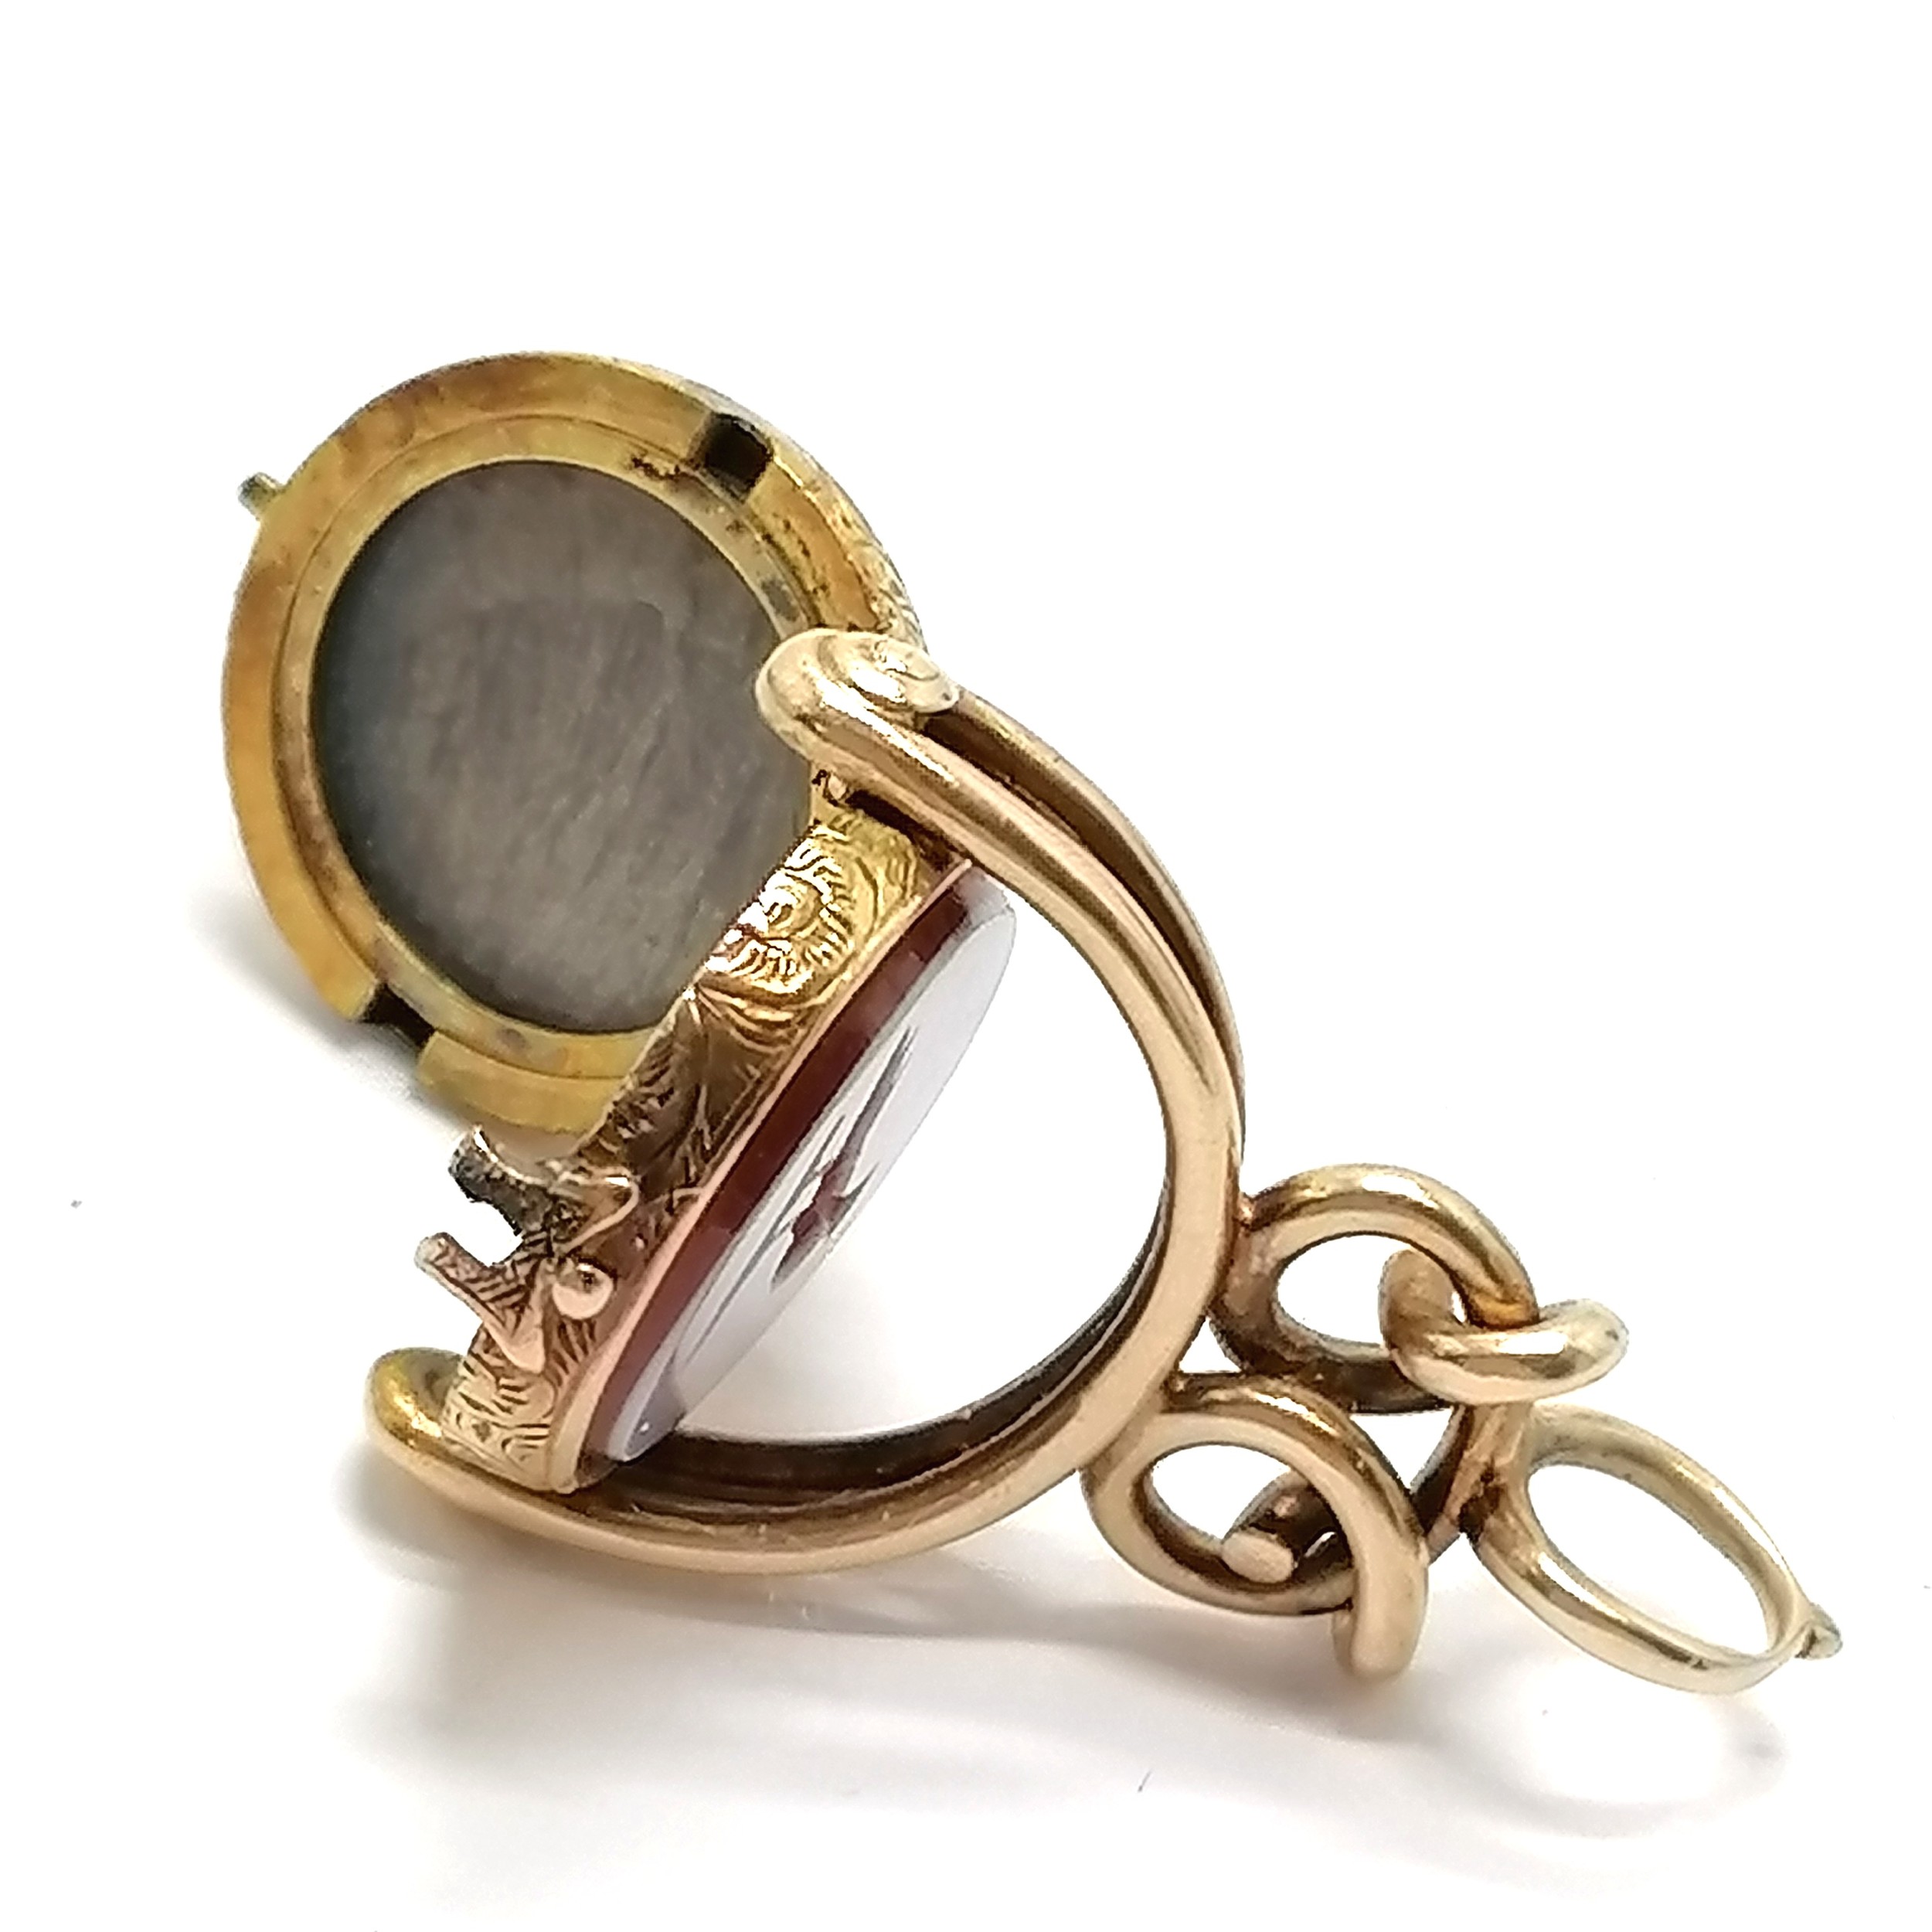 Unmarked antique gold (touch tests as higher carat) RARE swivel fob locket with sardonyx and - Image 2 of 5